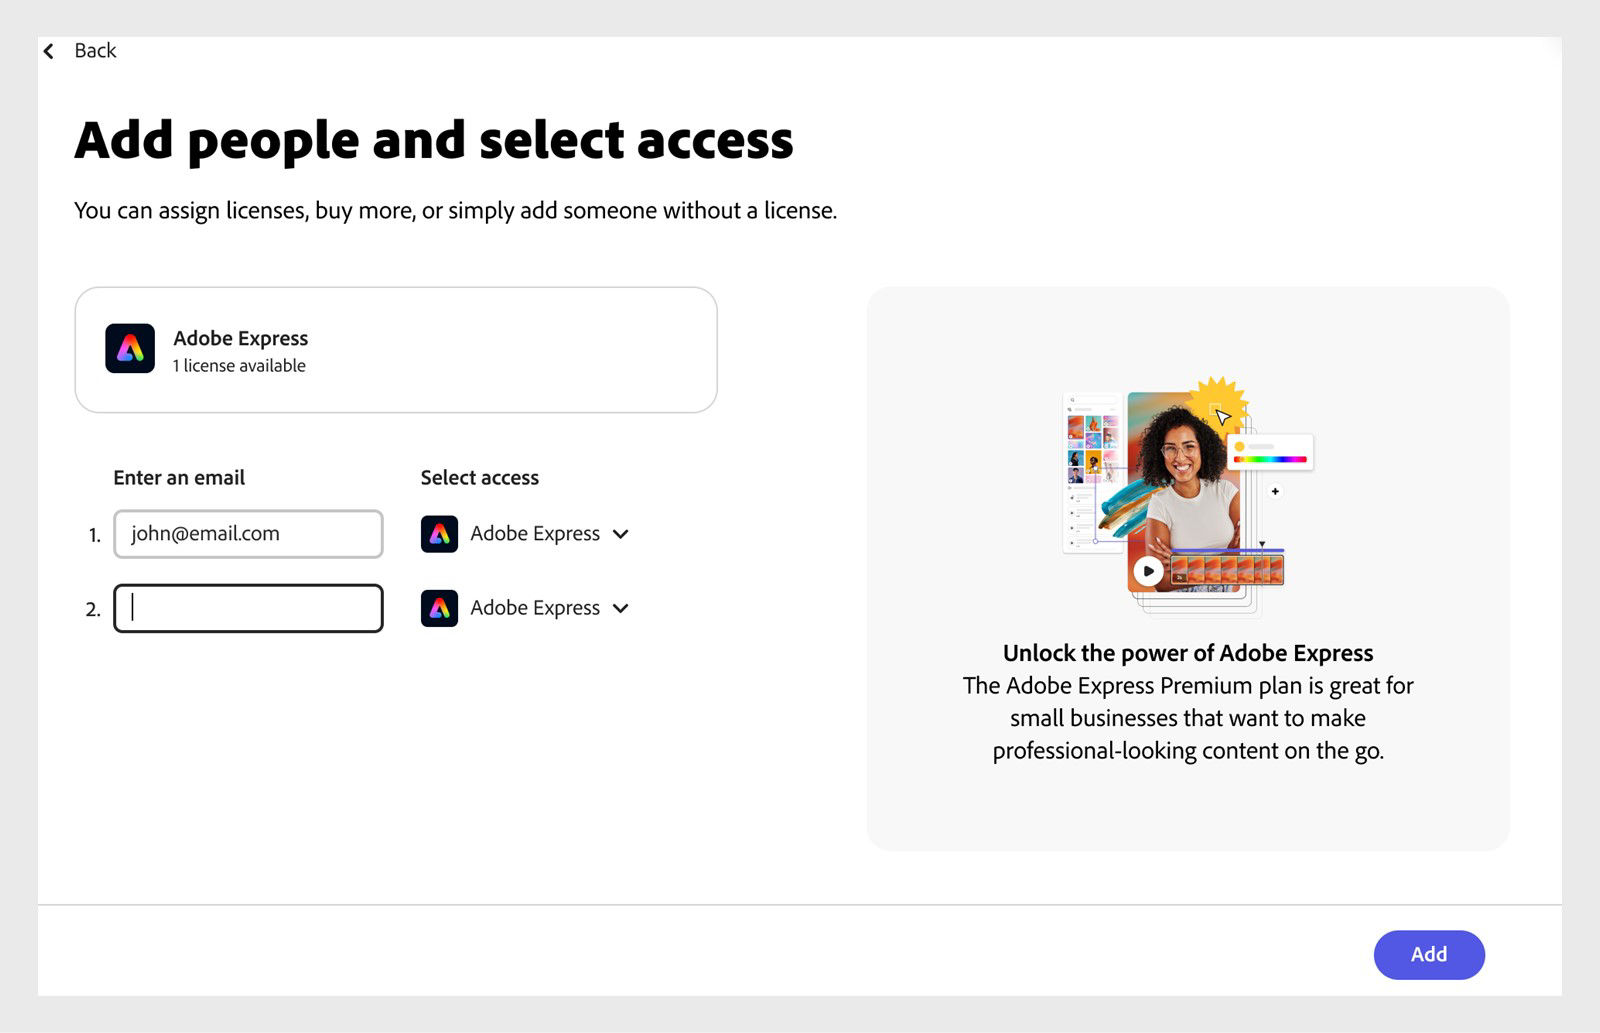 The image displays the Add people screen with options to enter user's email and assign app licenses with an "Add" button.